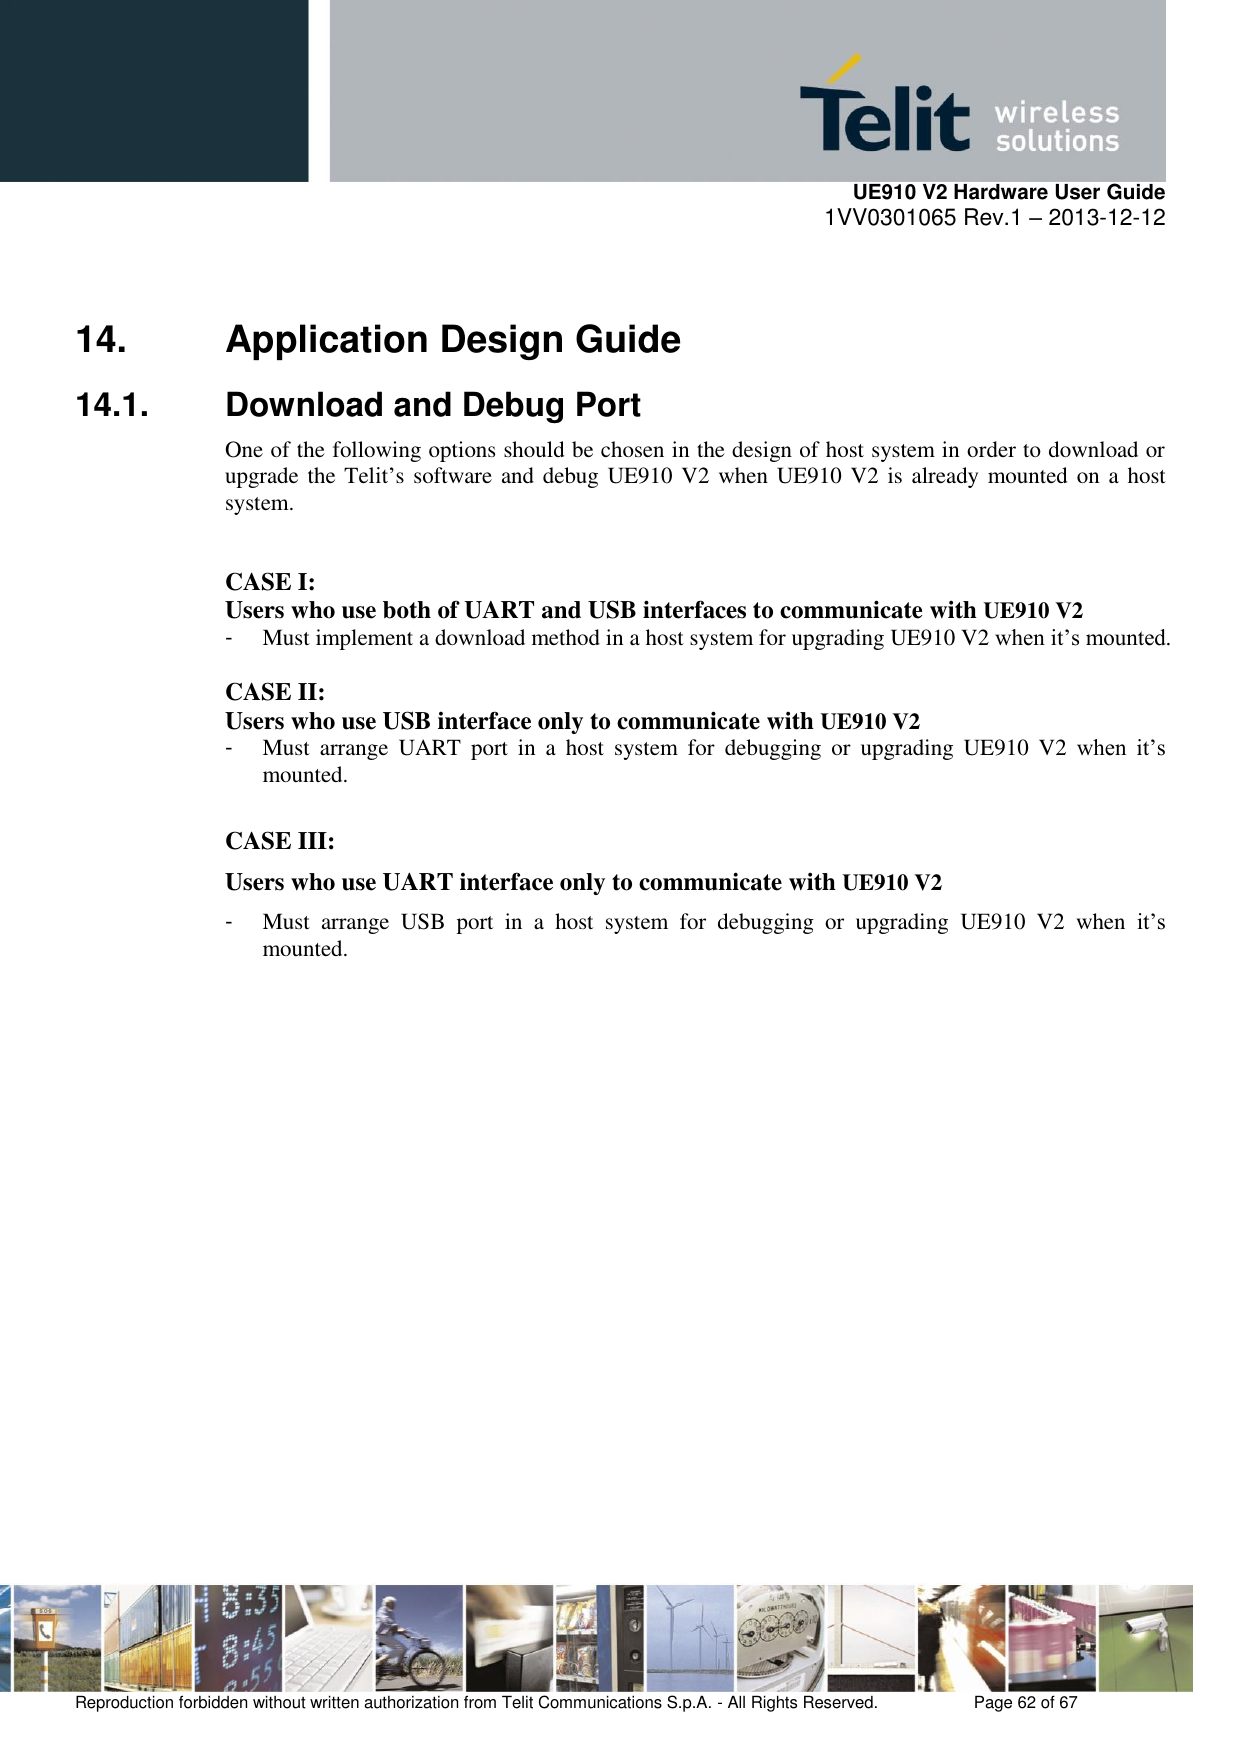     UE910 V2 Hardware User Guide 1VV0301065 Rev.1 – 2013-12-12  Reproduction forbidden without written authorization from Telit Communications S.p.A. - All Rights Reserved.    Page 62 of 67                                                     14.  Application Design Guide 14.1.  Download and Debug Port One of the following options should be chosen in the design of host system in order to download or upgrade the Telit’s software and debug UE910 V2 when UE910 V2 is already mounted on a host system.  CASE I: Users who use both of UART and USB interfaces to communicate with UE910 V2 -  Must implement a download method in a host system for upgrading UE910 V2 when it’s mounted.  CASE II: Users who use USB interface only to communicate with UE910 V2 -  Must  arrange  UART  port  in  a  host  system  for  debugging  or  upgrading  UE910  V2  when  it’s mounted.  CASE III: Users who use UART interface only to communicate with UE910 V2 -  Must  arrange  USB  port  in  a  host  system  for  debugging  or  upgrading  UE910  V2  when  it’s mounted.      